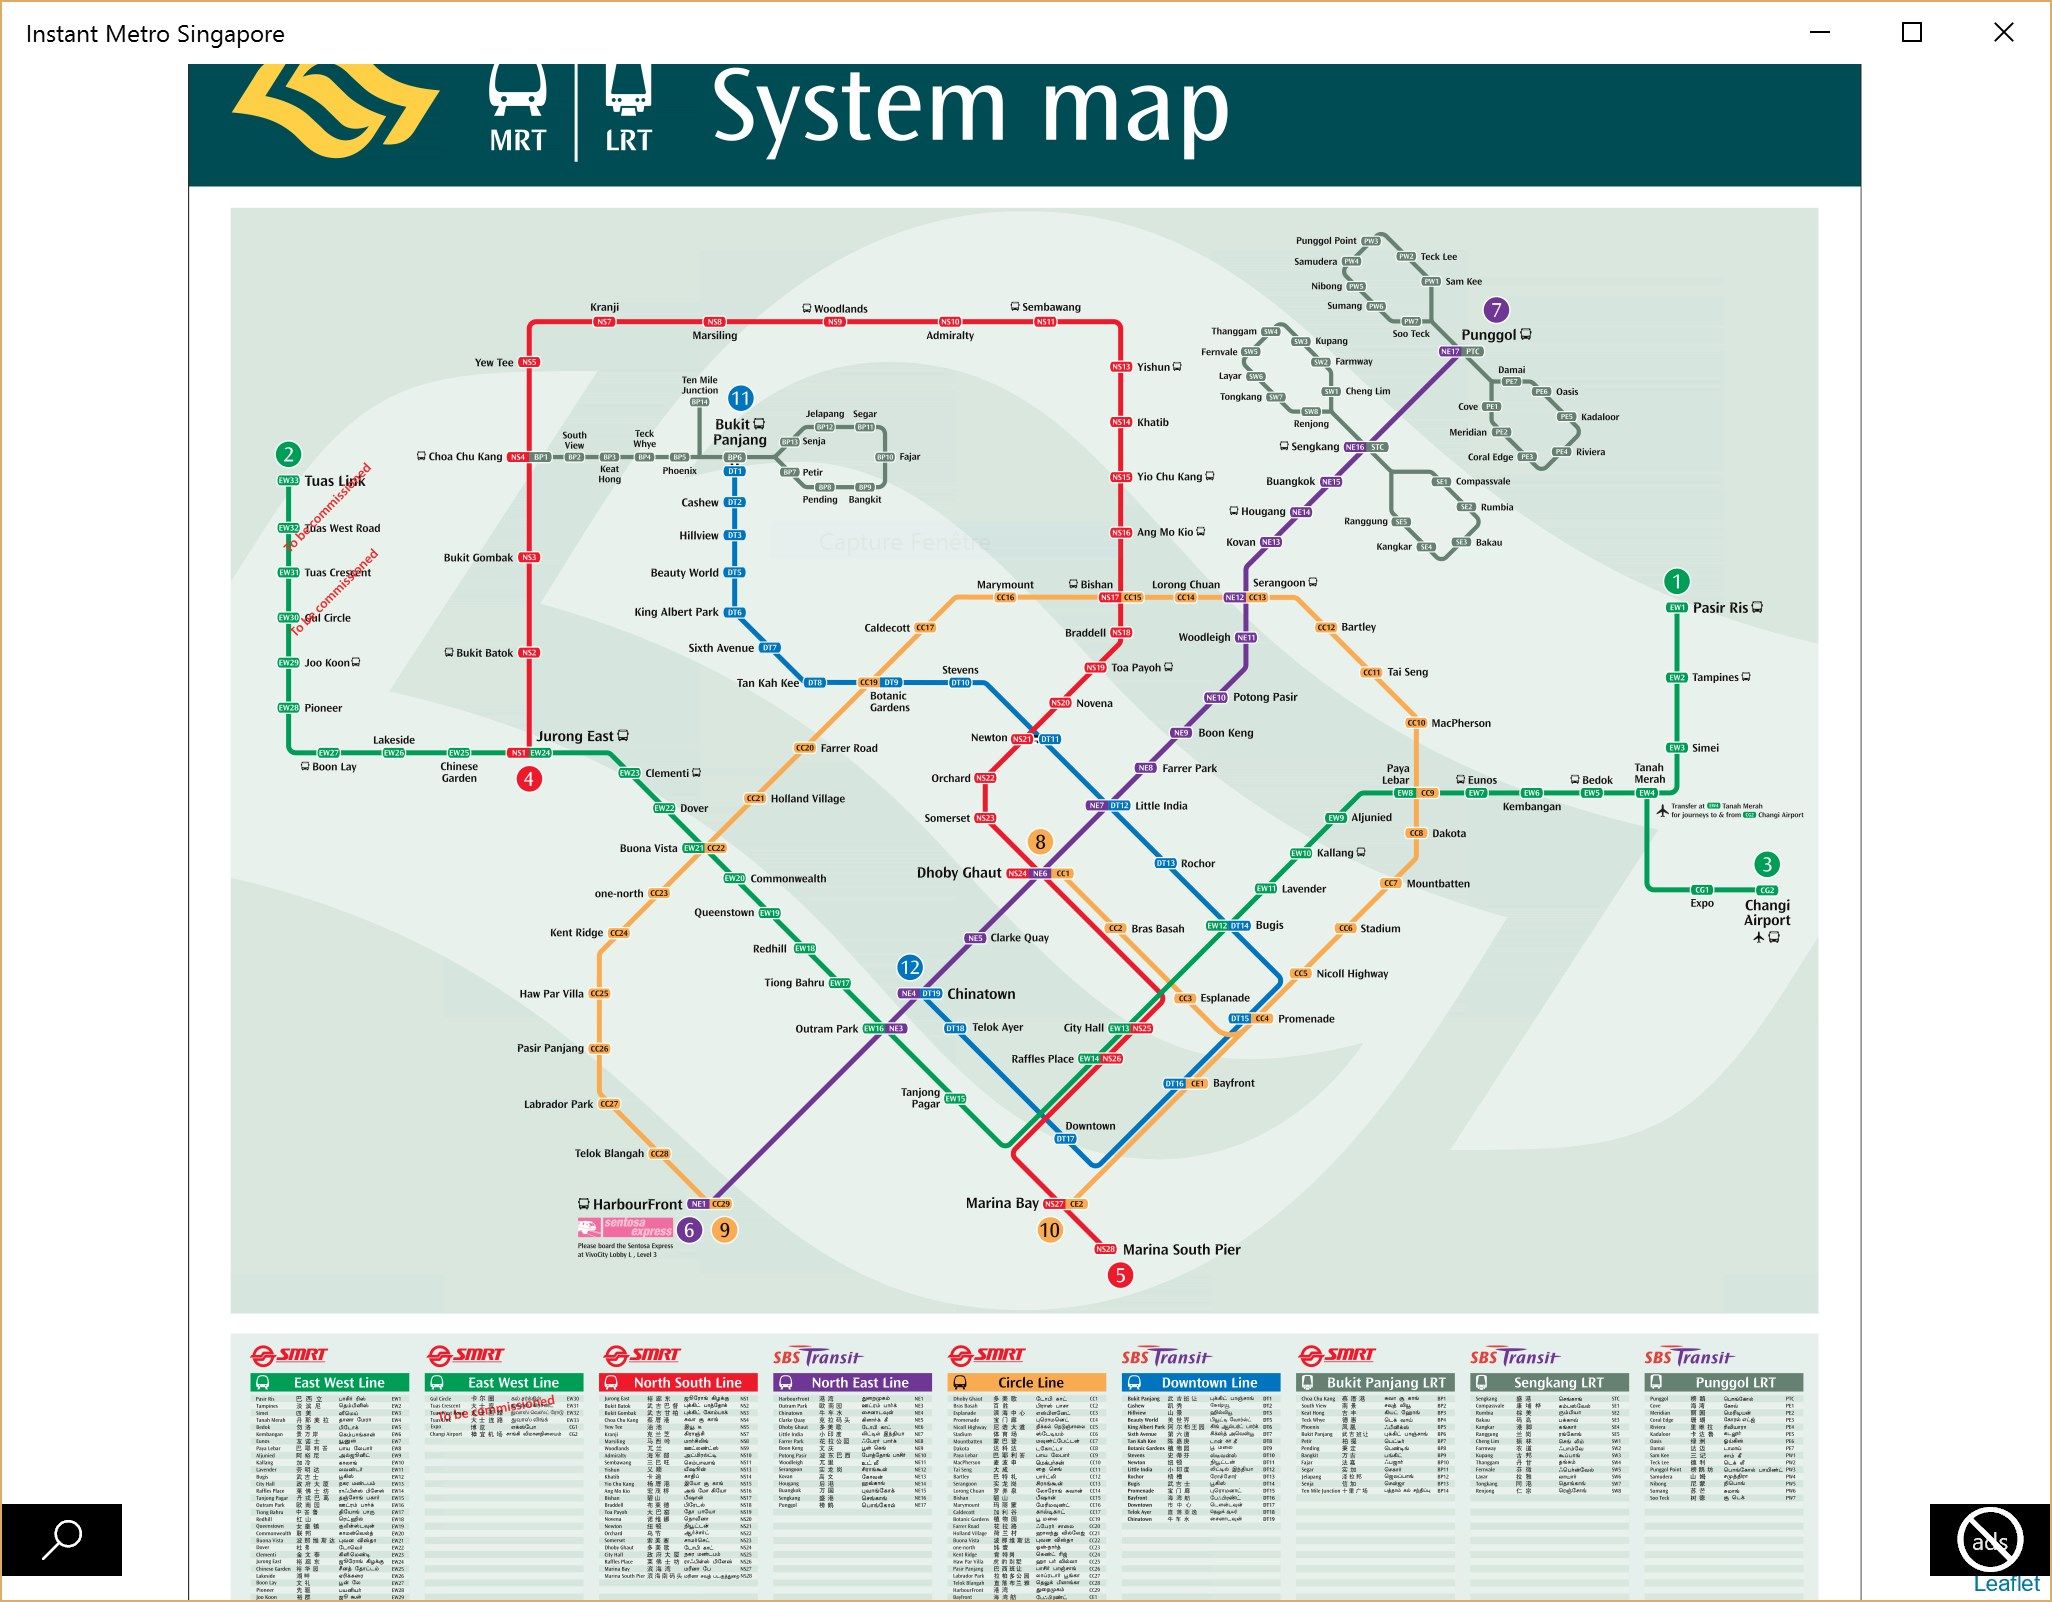 Browse the Singapore metro map in high definition